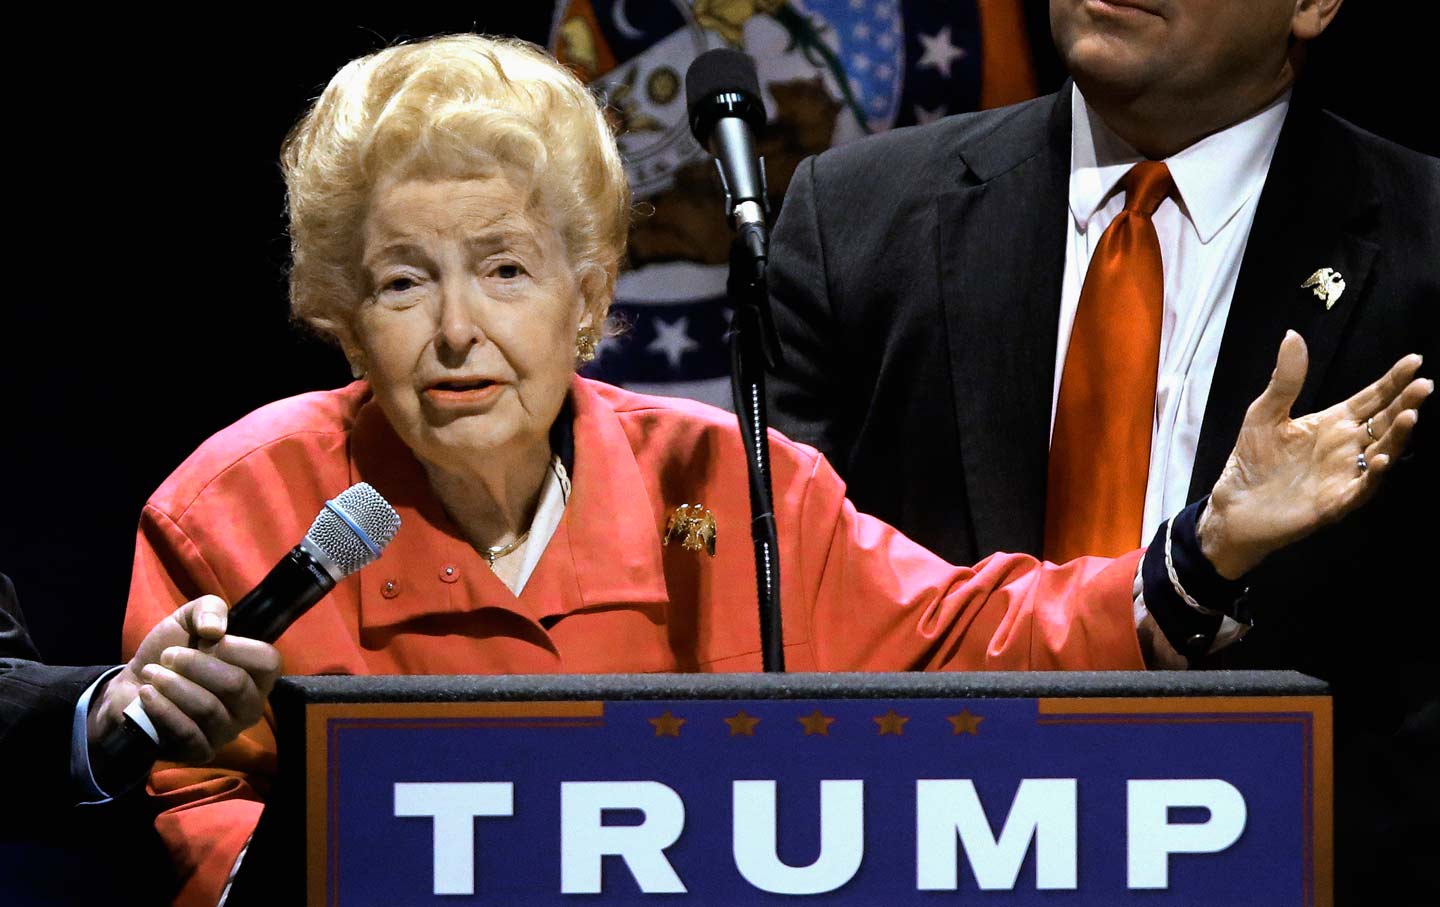 Phyllis Schlafly speaks at Trump rally